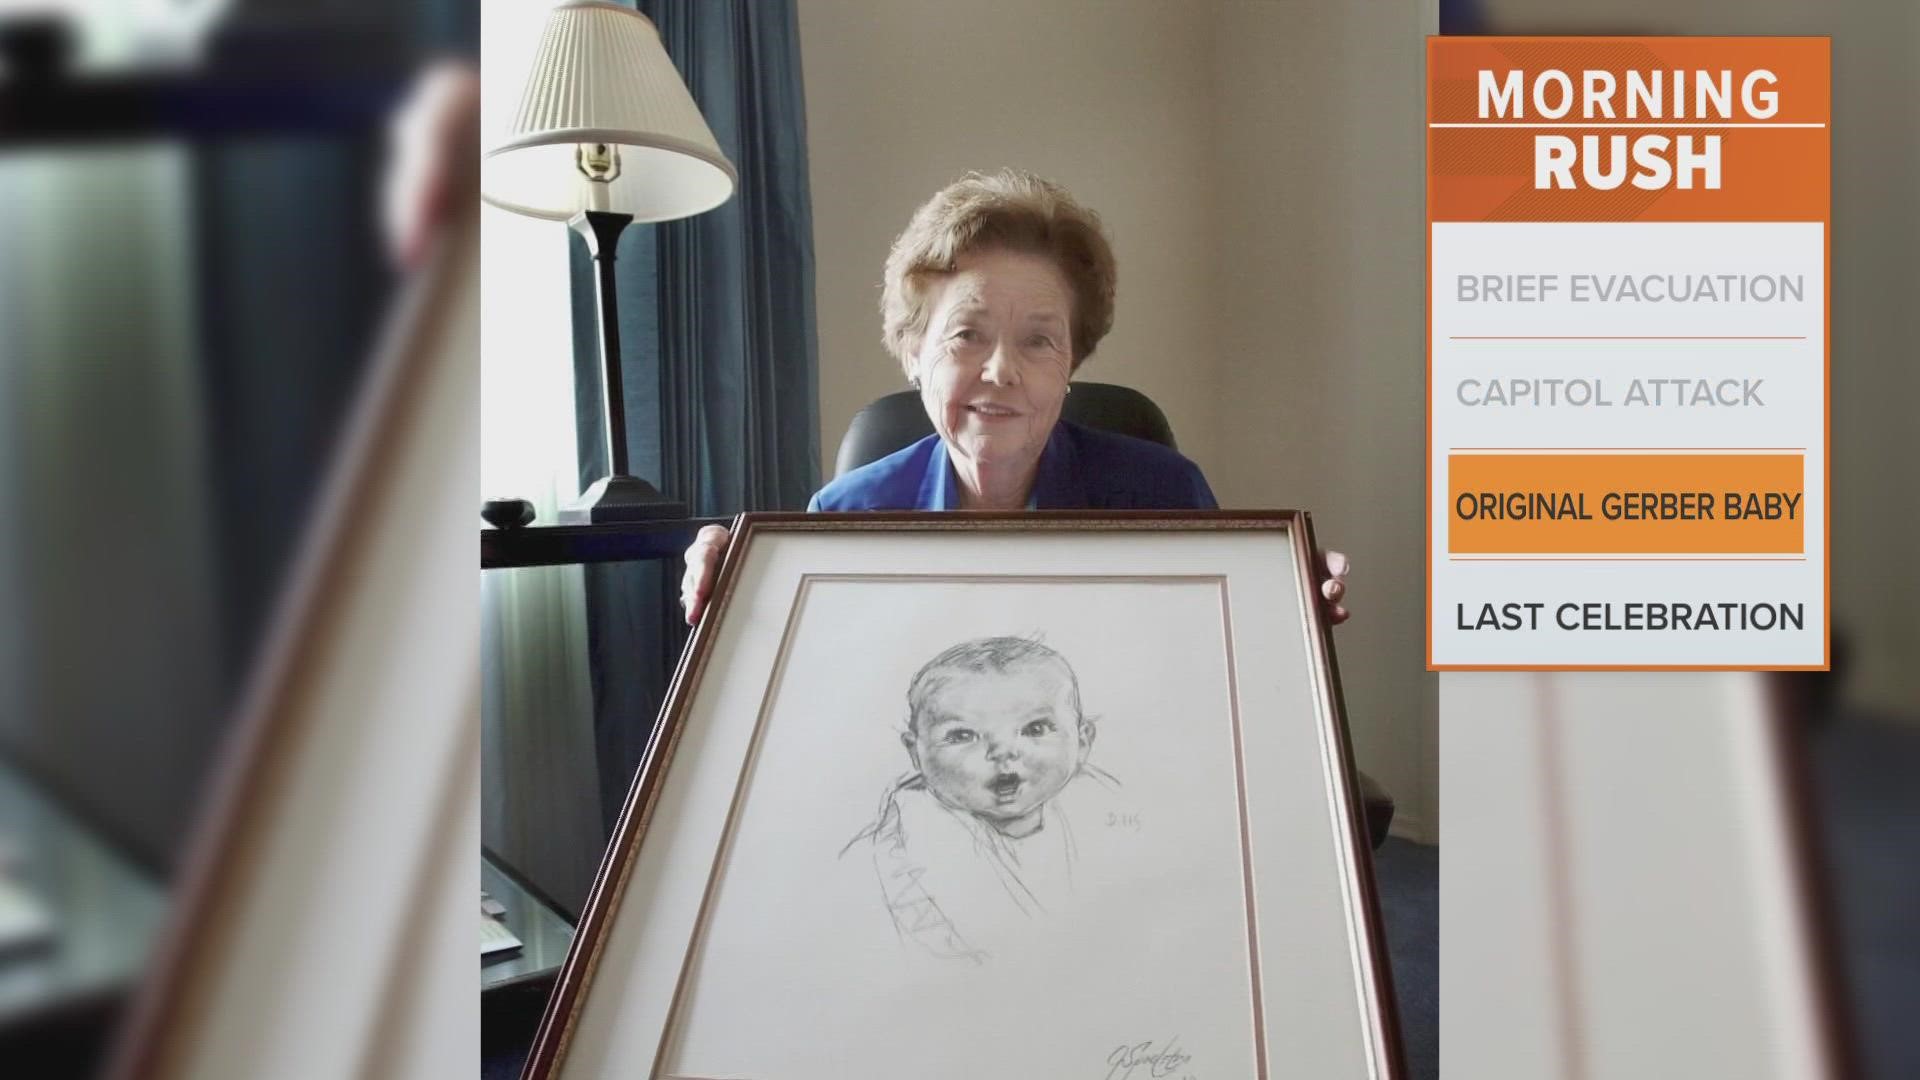 Ann Turner Cook's likeness became the face of Gerber after a 1928 contest when her neighbor made a charcoal sketch of her.